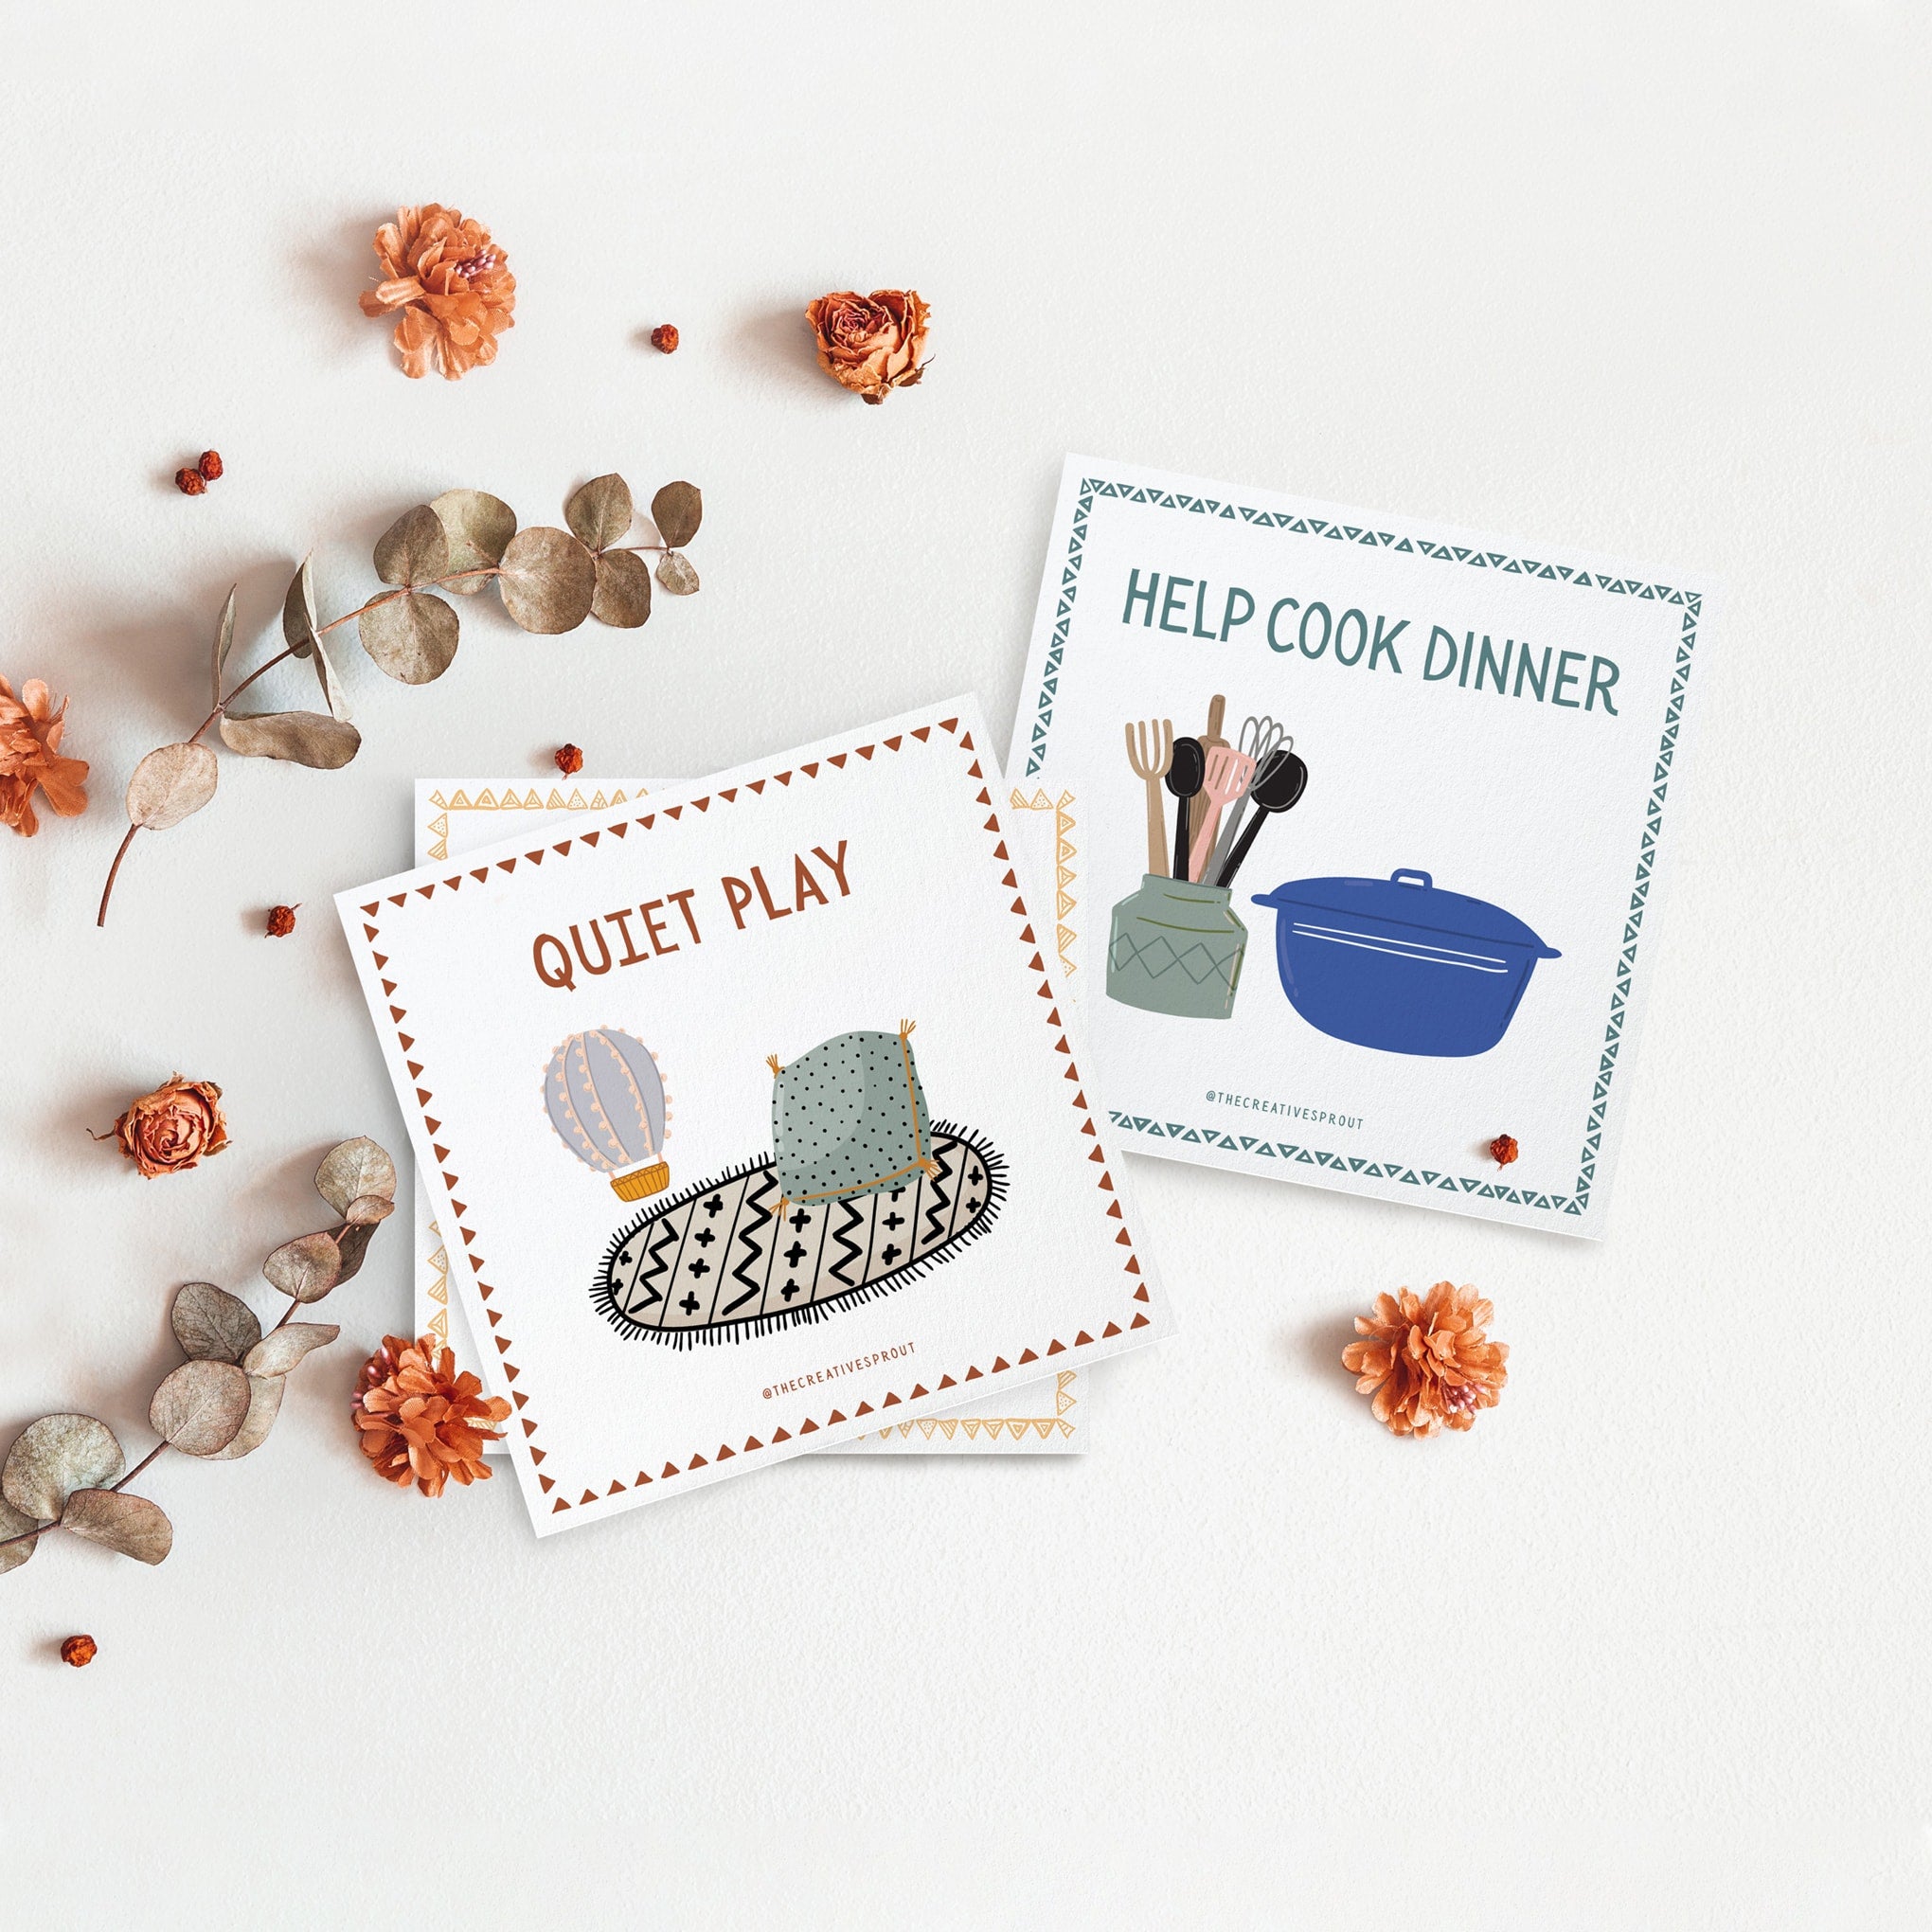 montessori toys - toddler routine chart cards showing quiet play and help cook dinner cards with flowers in background